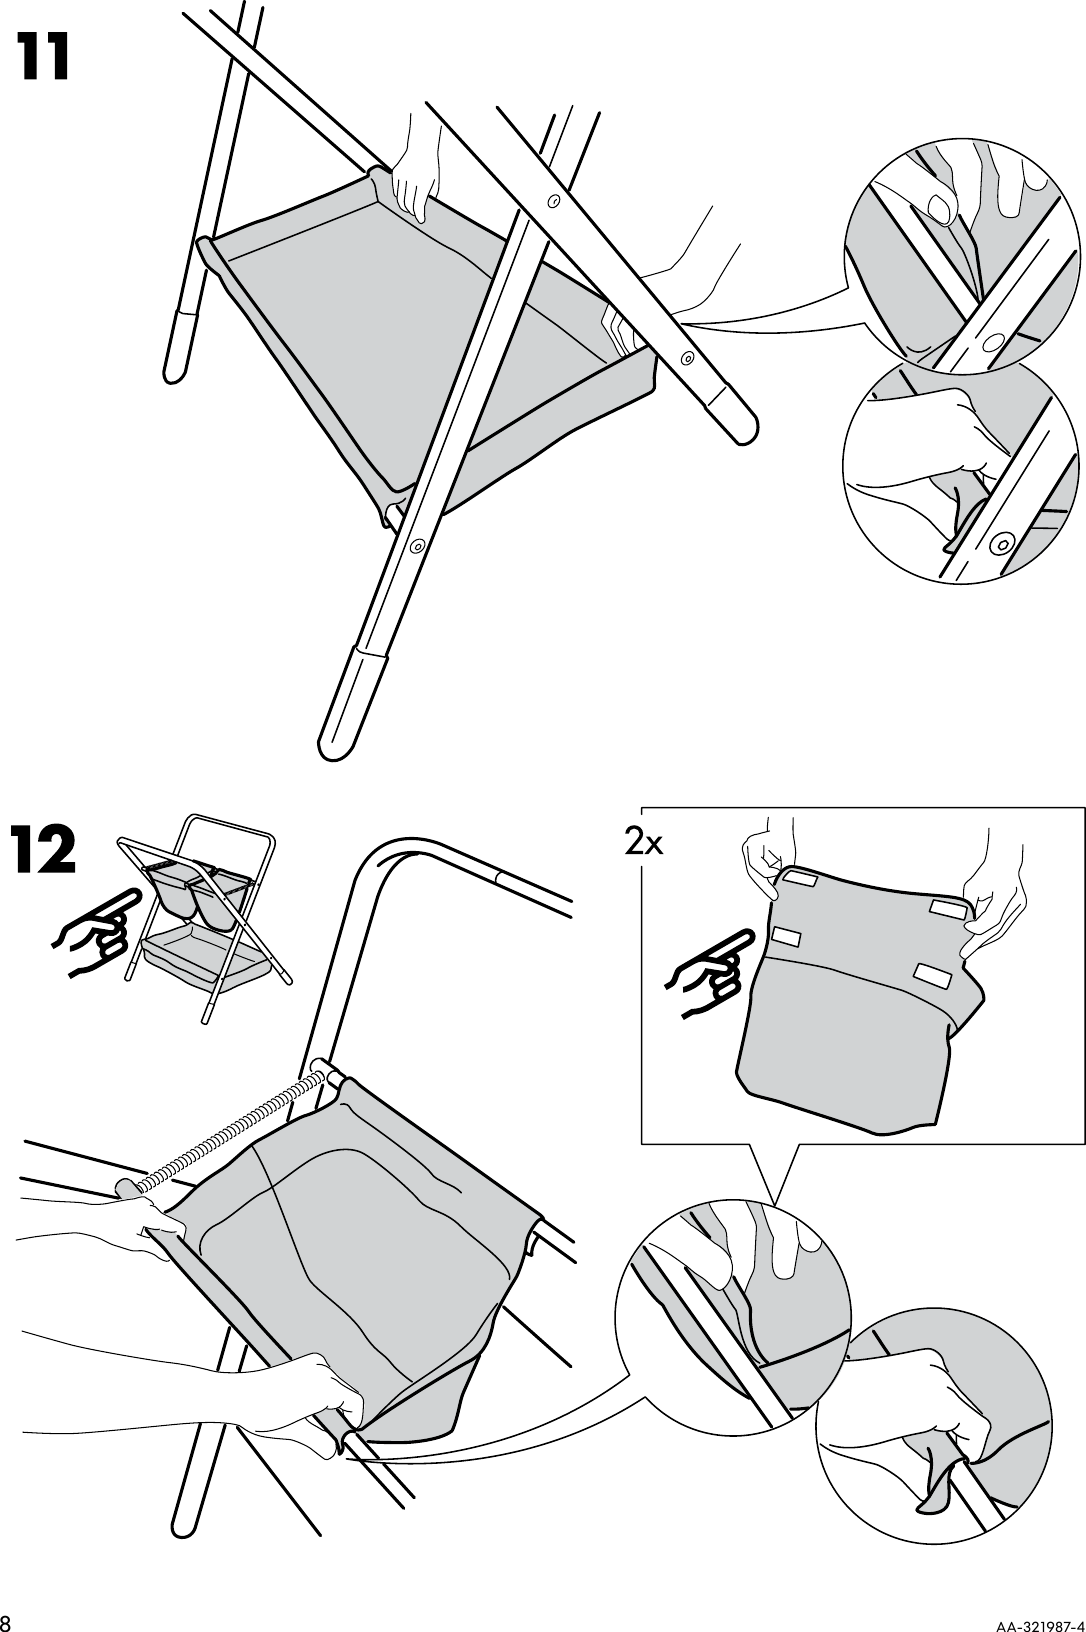 Page 8 of 12 - Ikea Ikea-Spoling-Changing-Table-Assembly-Instruction